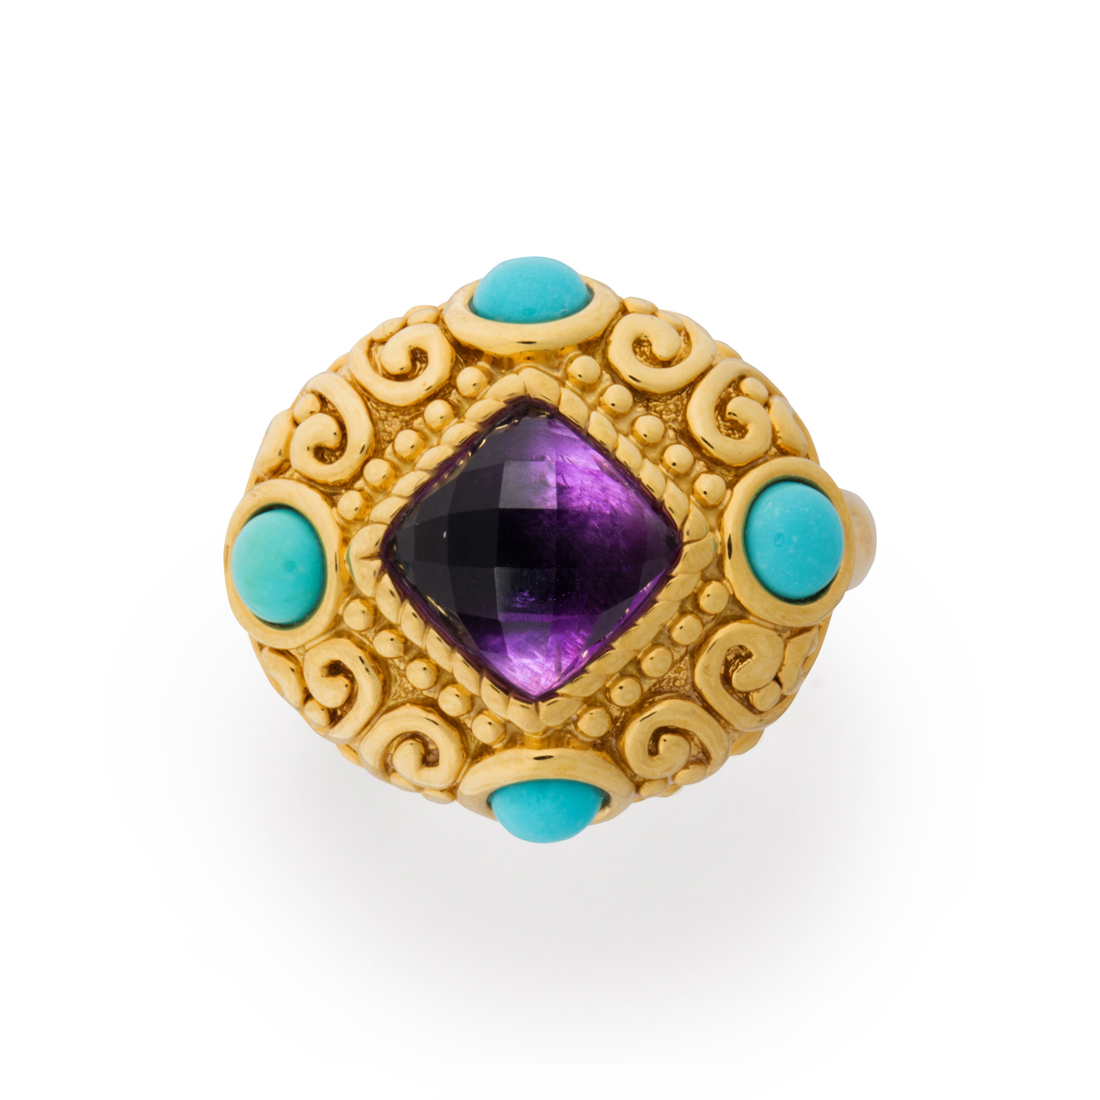 AN AMETHYST, TURQUOISE AND FOURTEEN